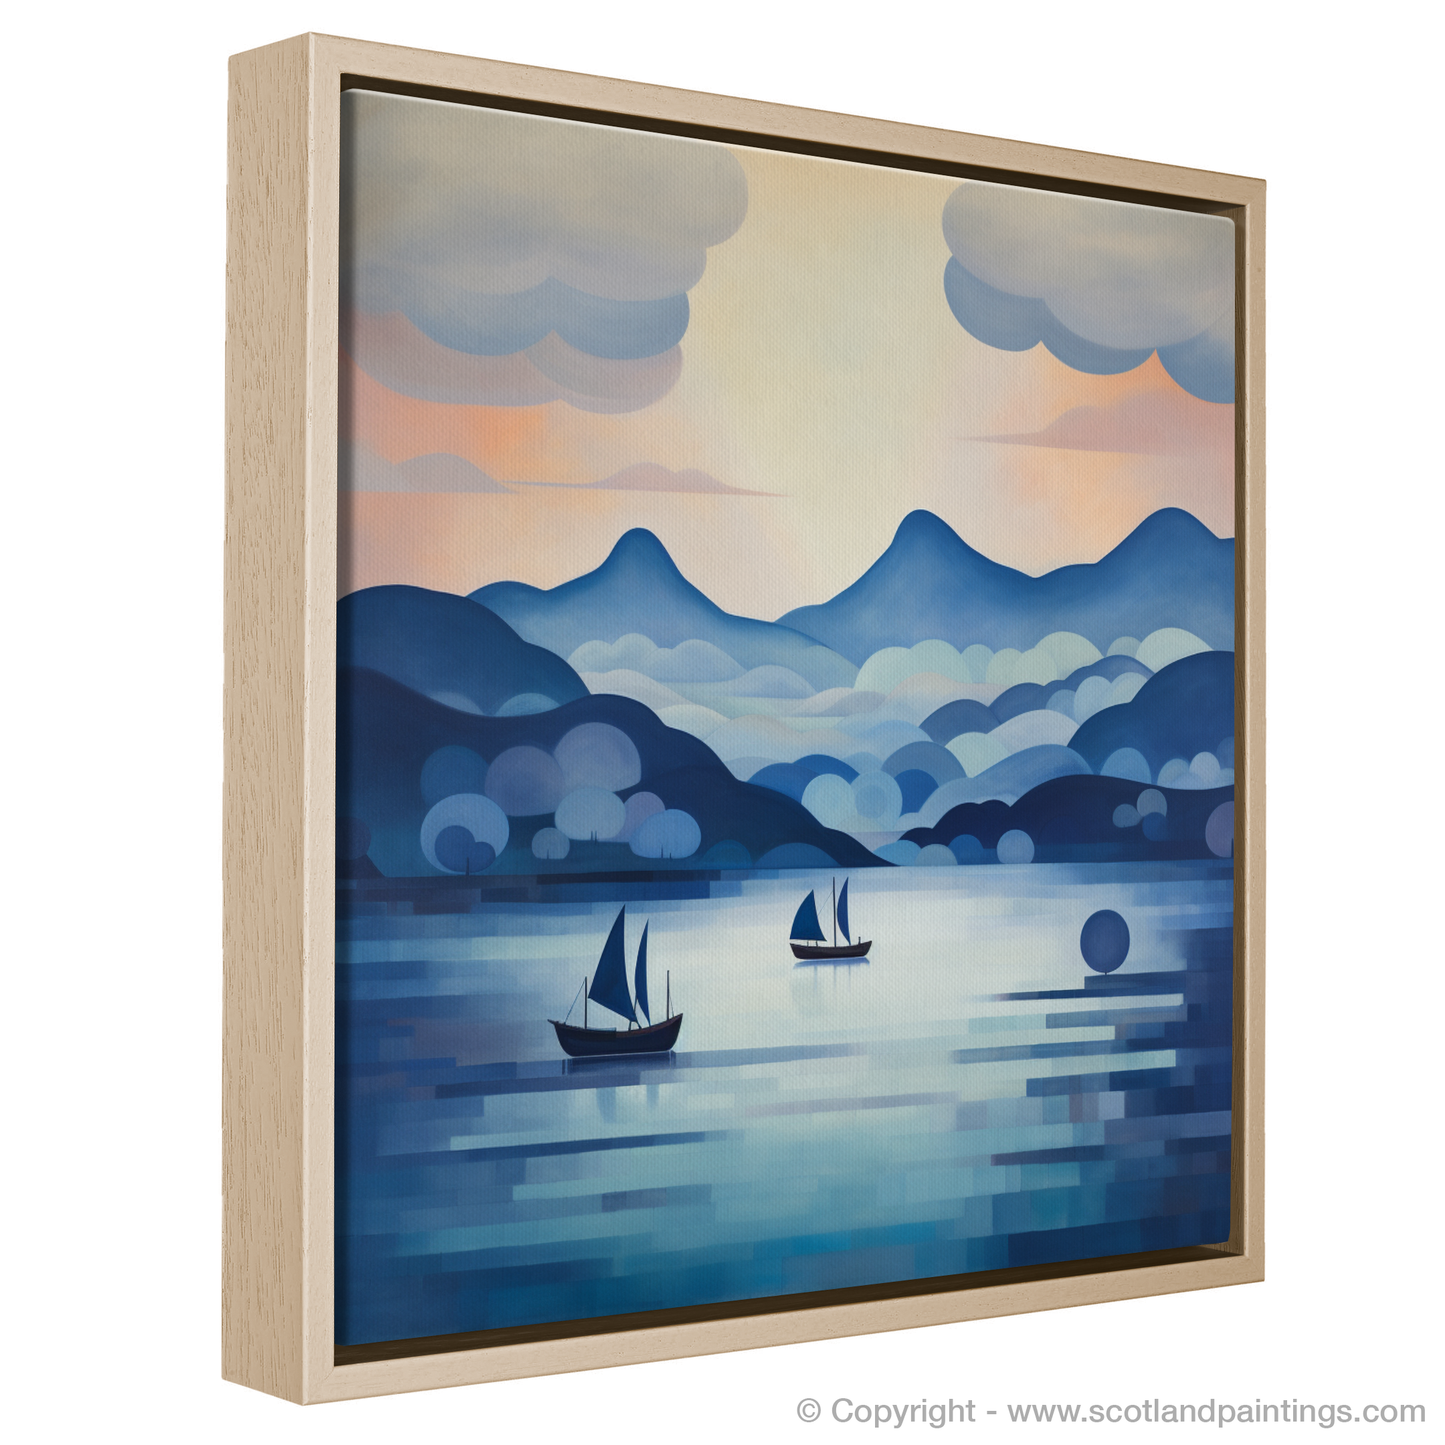 Painting and Art Print of Misty morning on Loch Lomond entitled "Misty Morning Abstract: A Serene Escape to Loch Lomond".